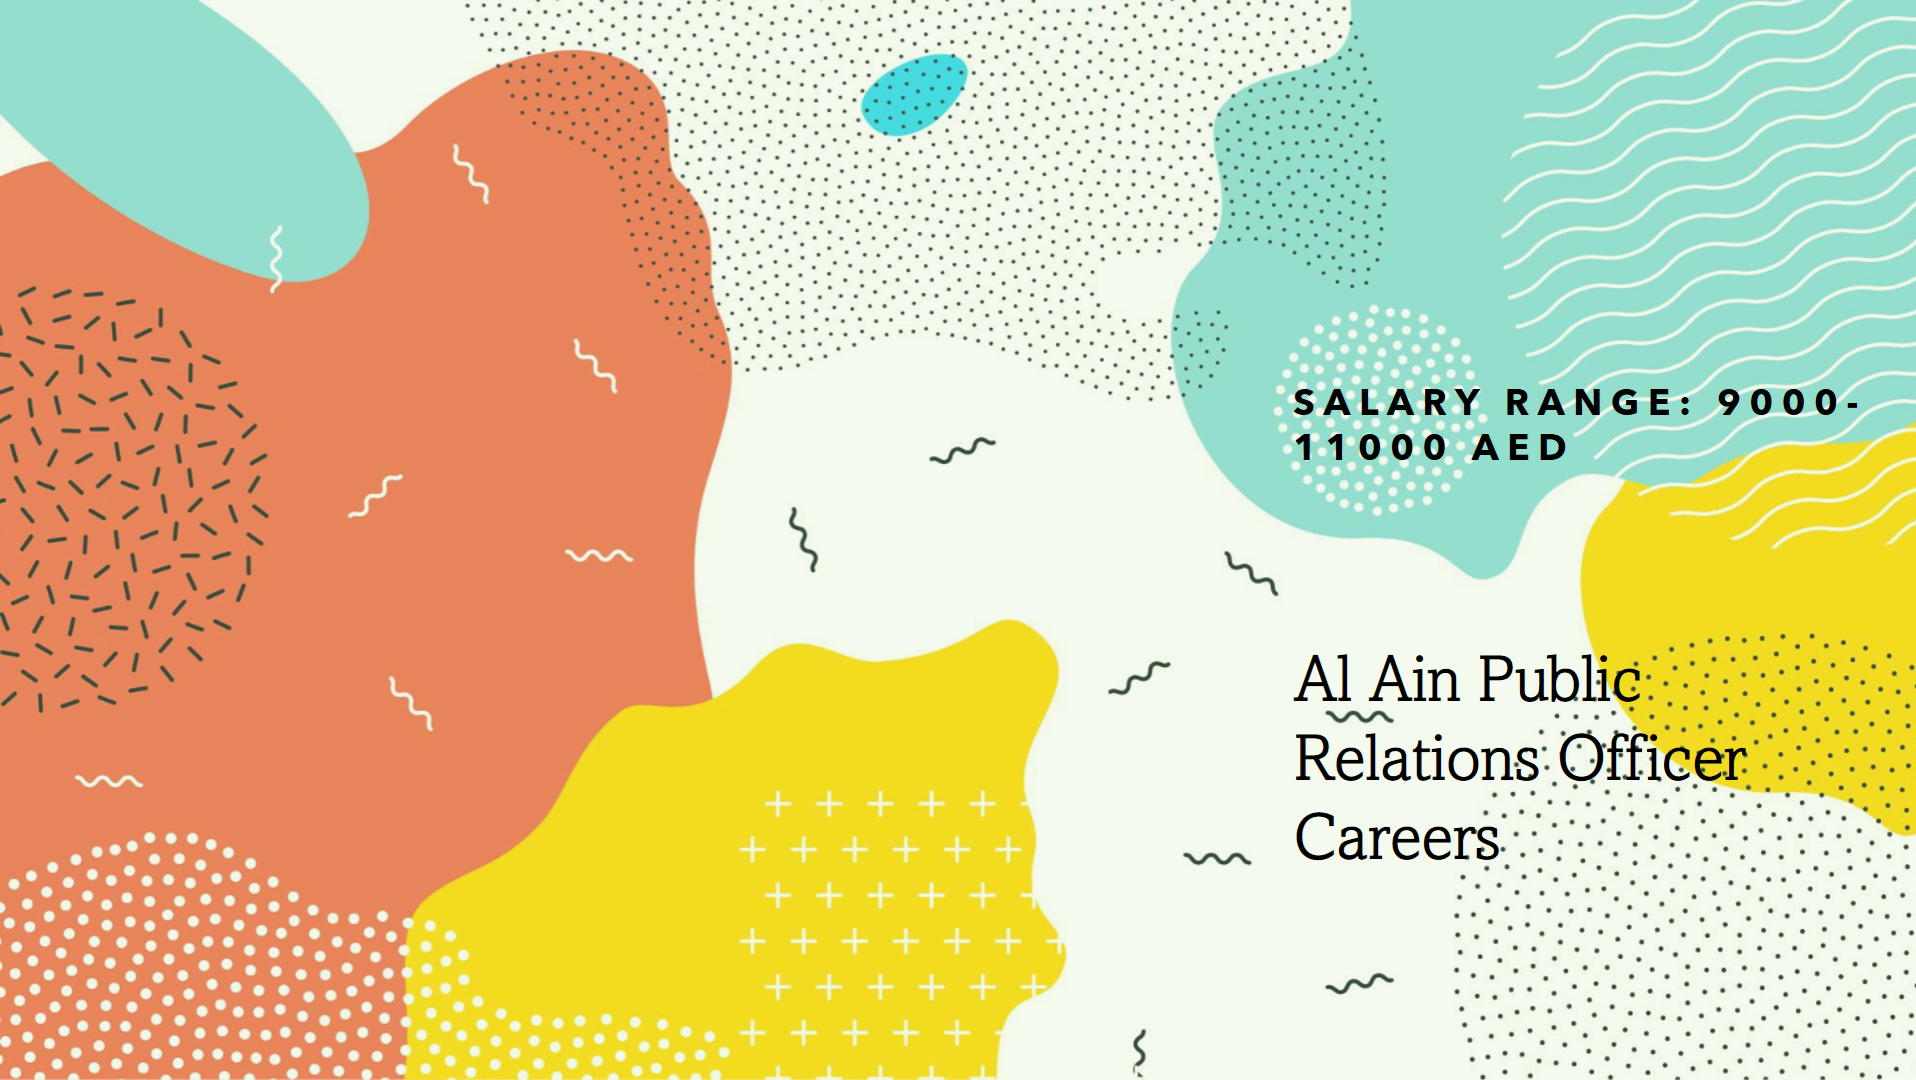 al ain public relations officer careers with salary 9000 to 11,000 AED